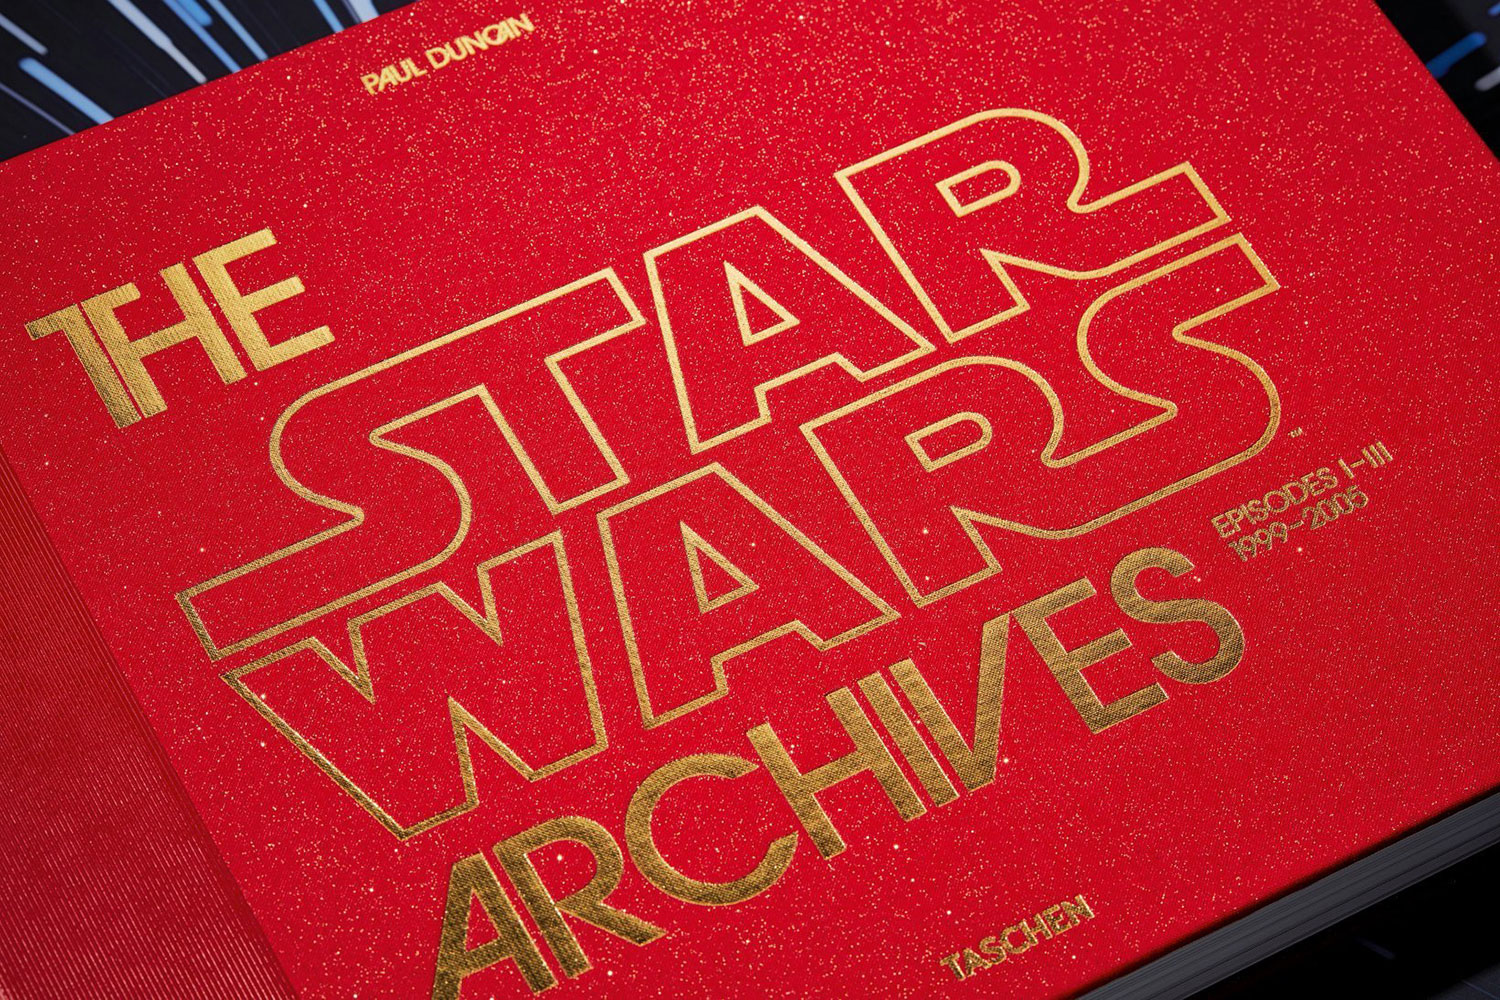 The Star Wars Archives: 1999 – 2005